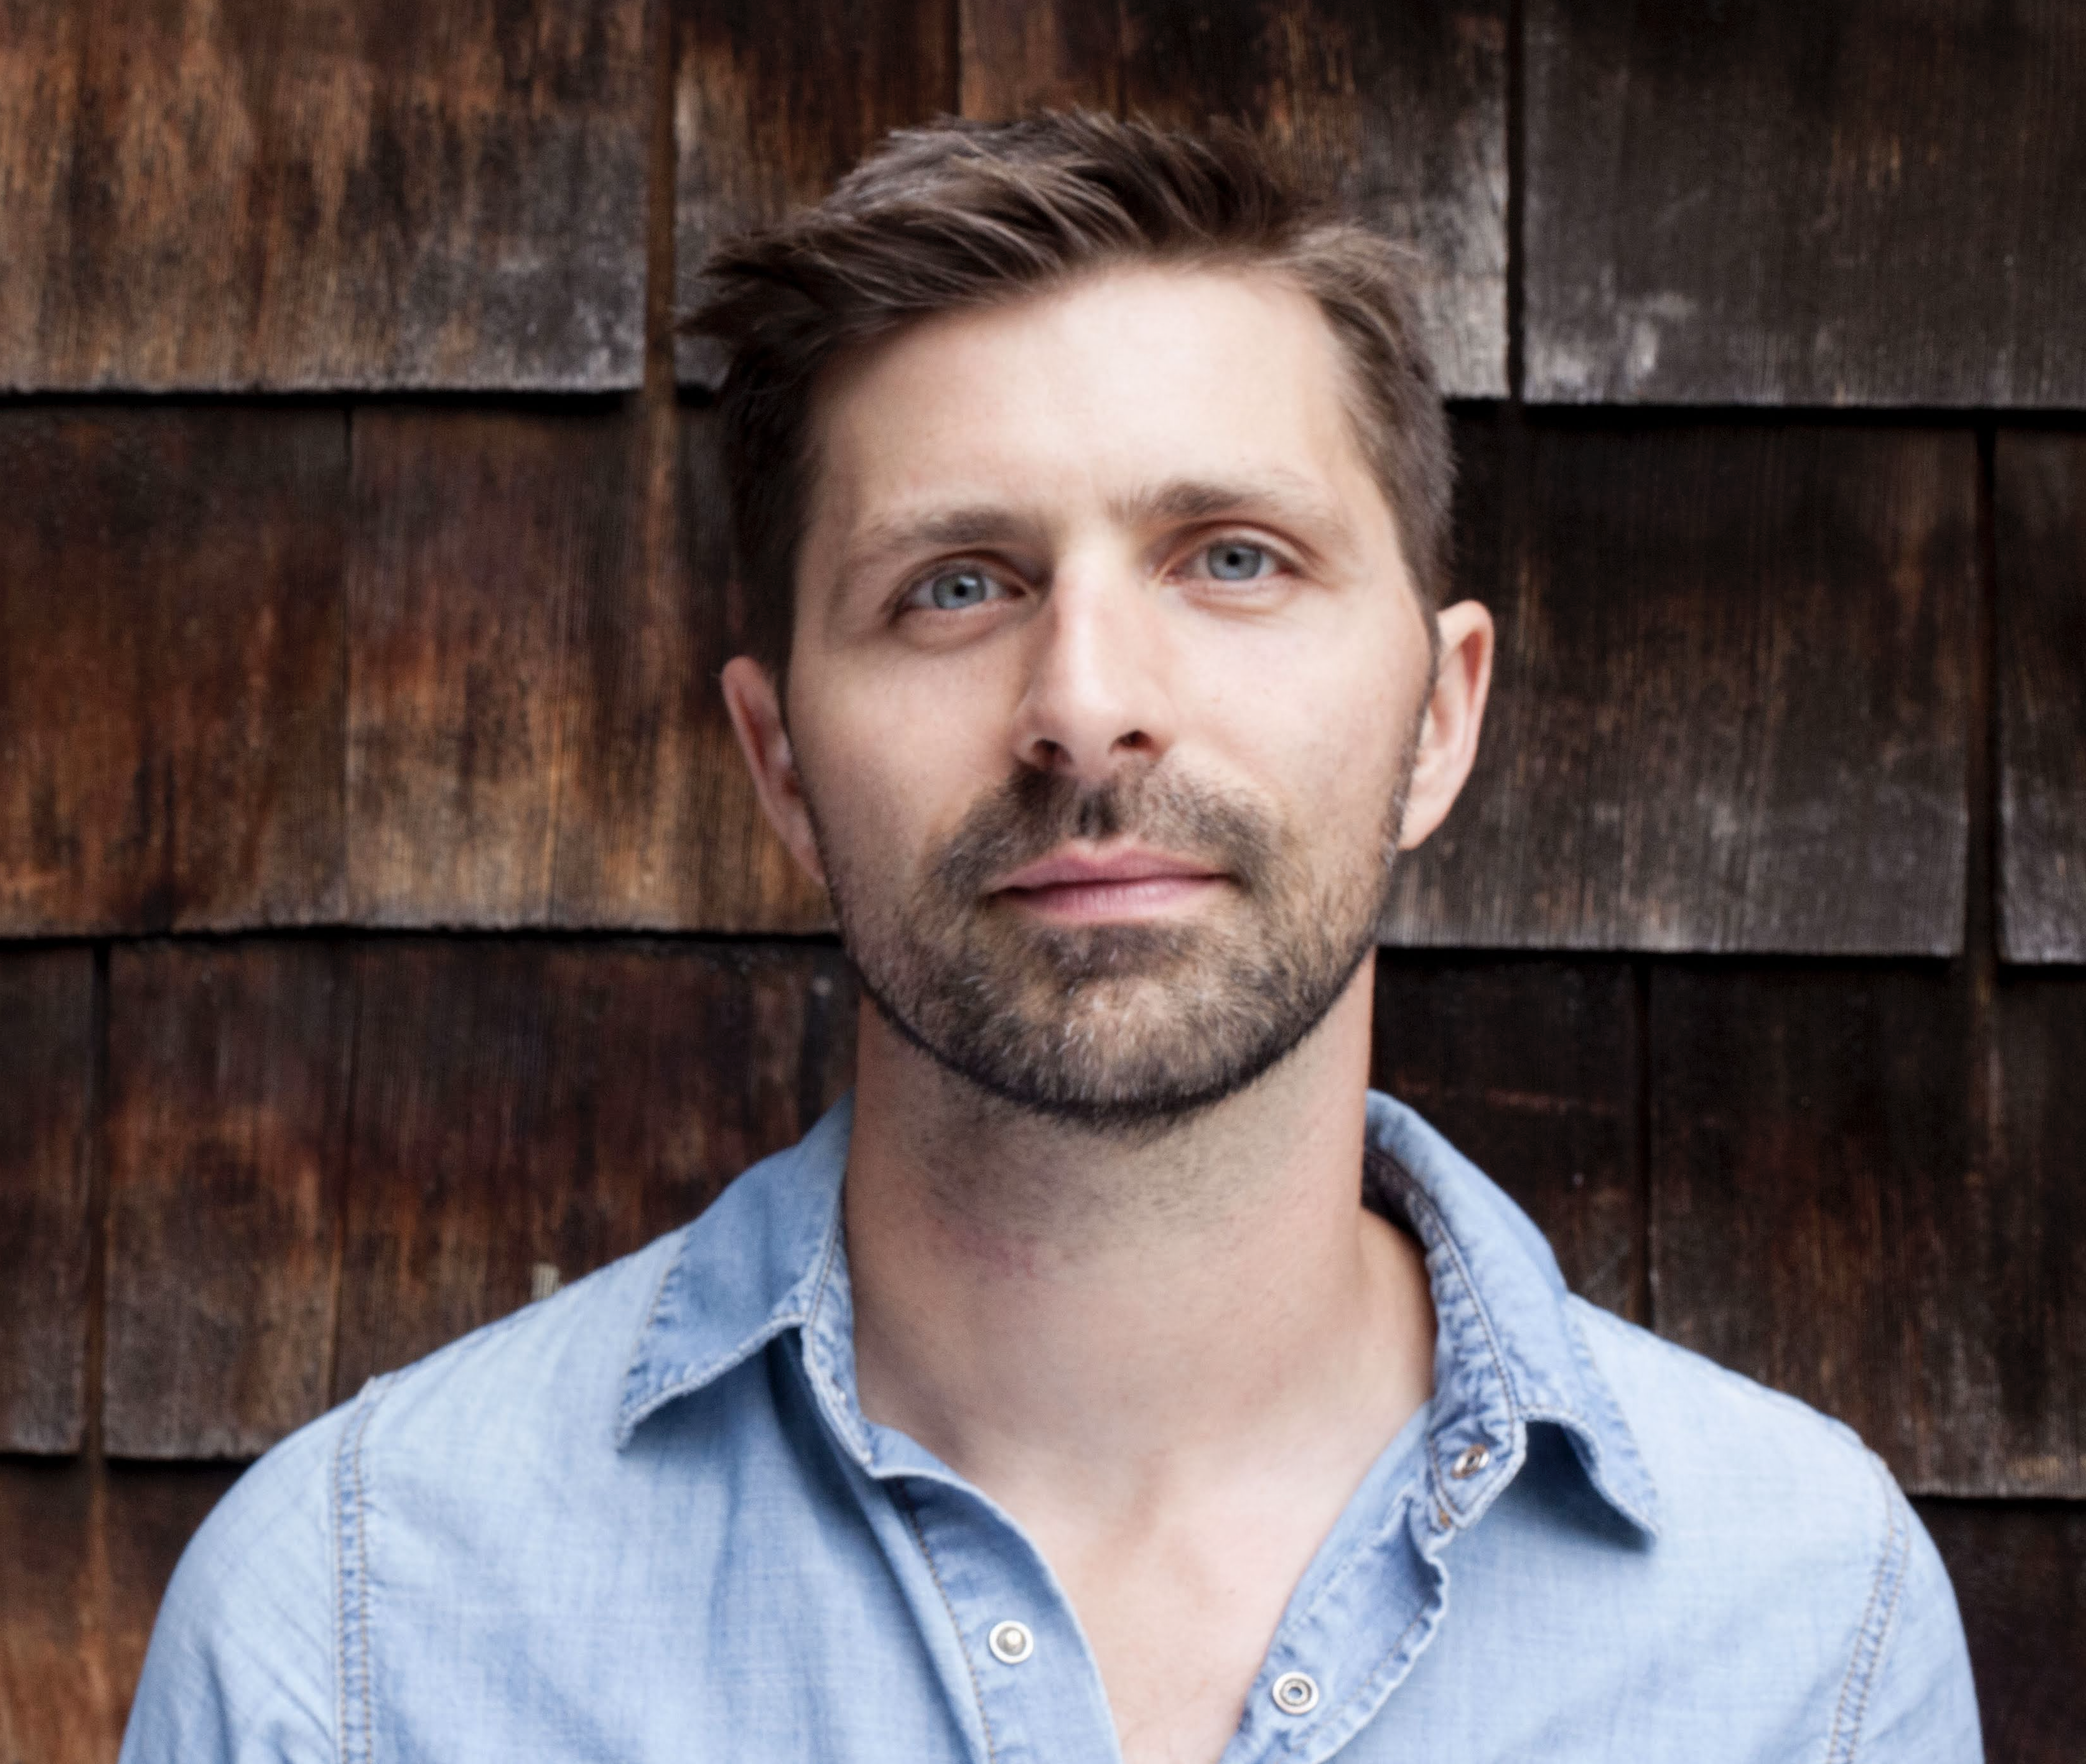 A headshot of the author in a light blue button down shirt against dark wood shingle siding. 